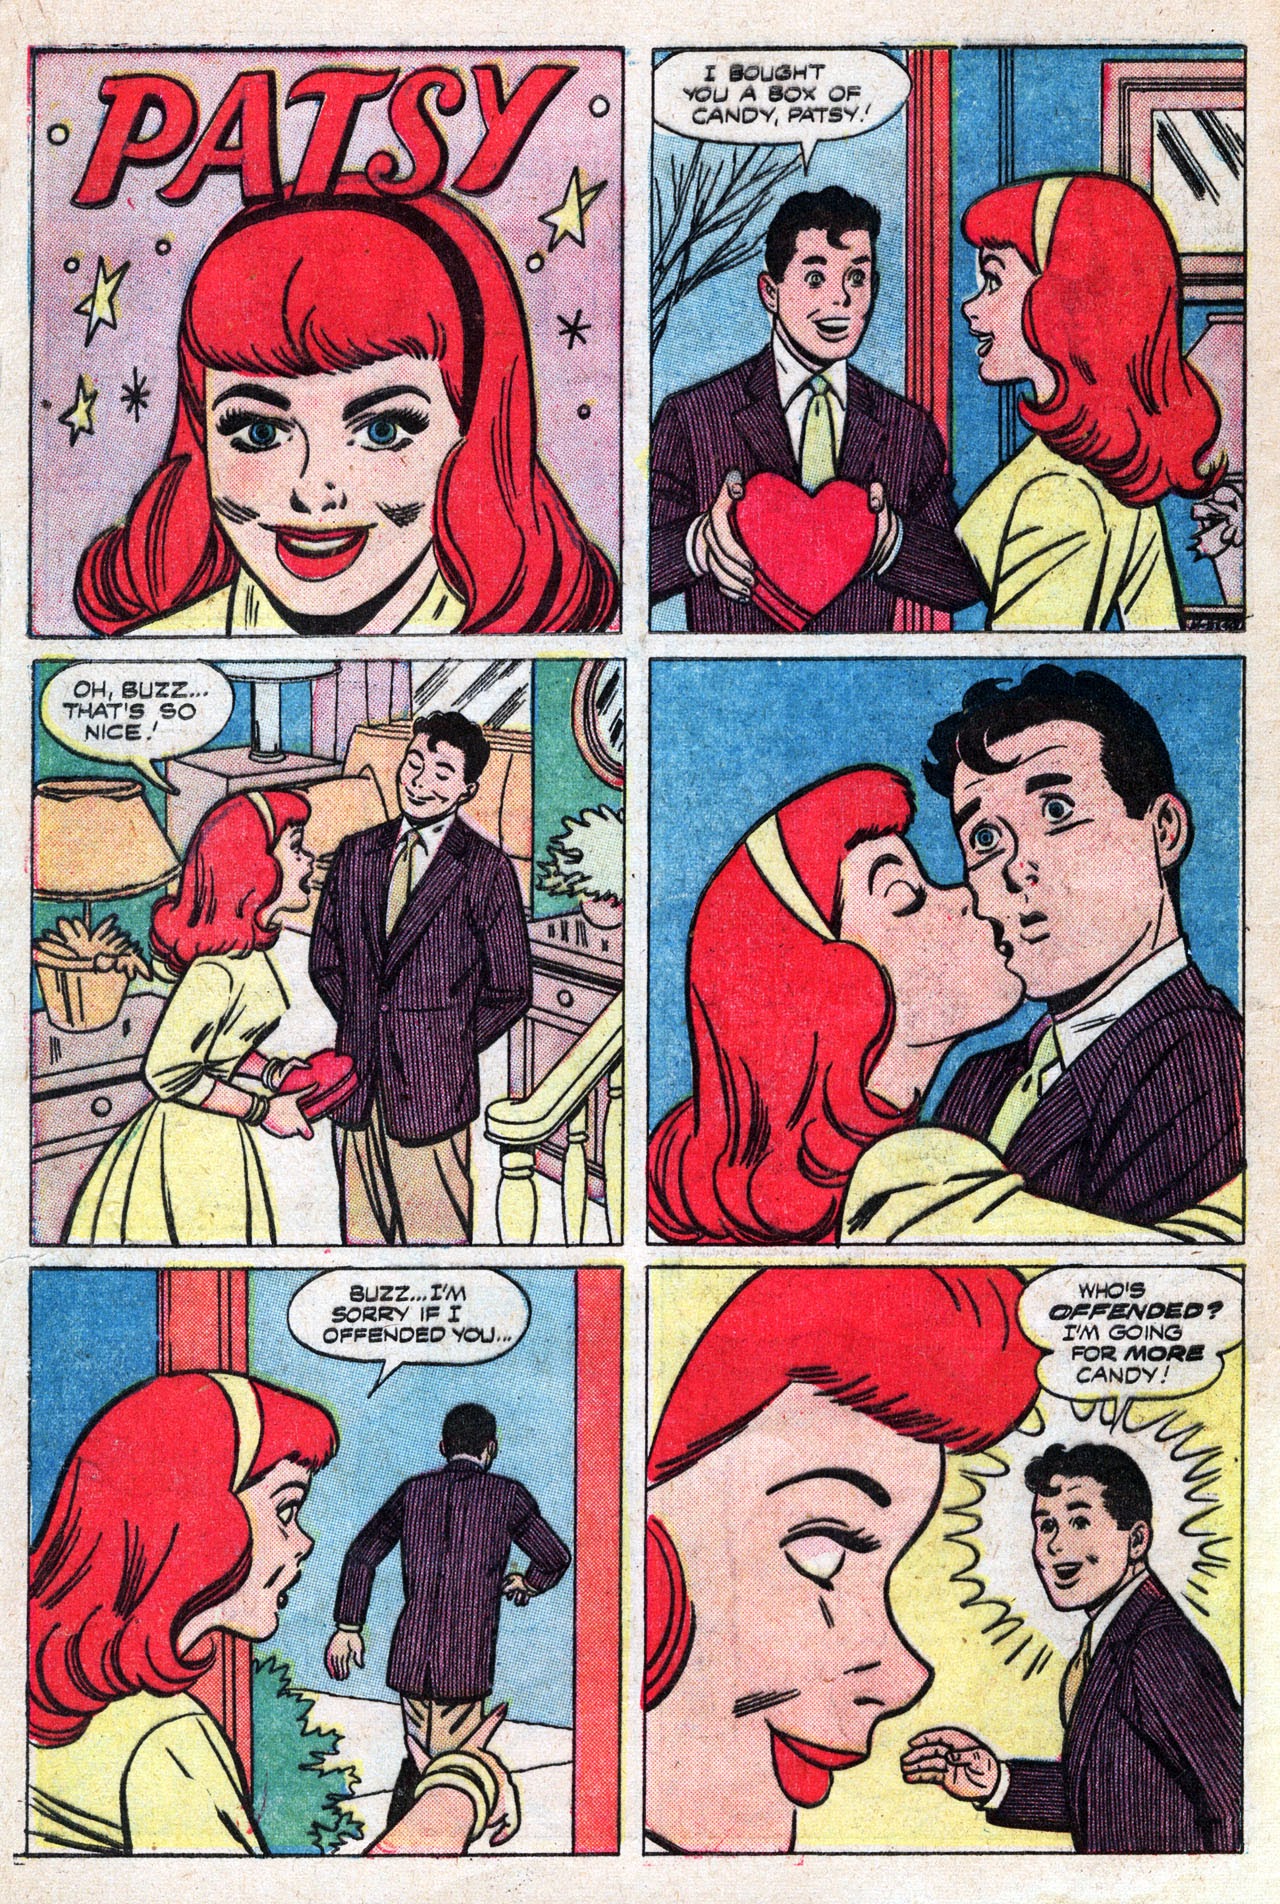 Read online A Date with Patsy comic -  Issue # Full - 32